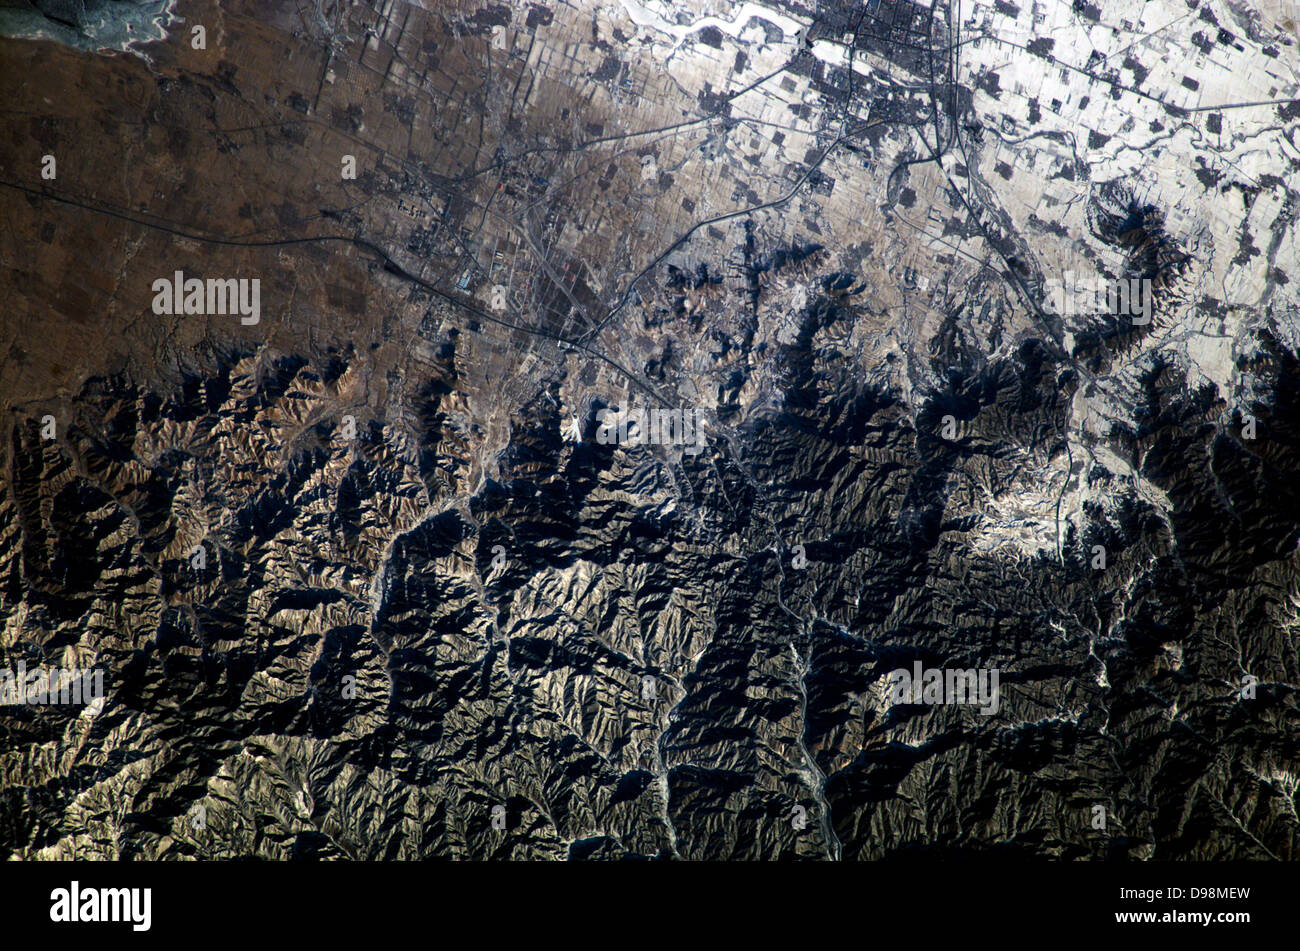 he Great Wall of China and Inner Mongolia are featured in this image photographed by Expedition 10 Commander Leroy Chiao on the International Space Station. Stock Photo